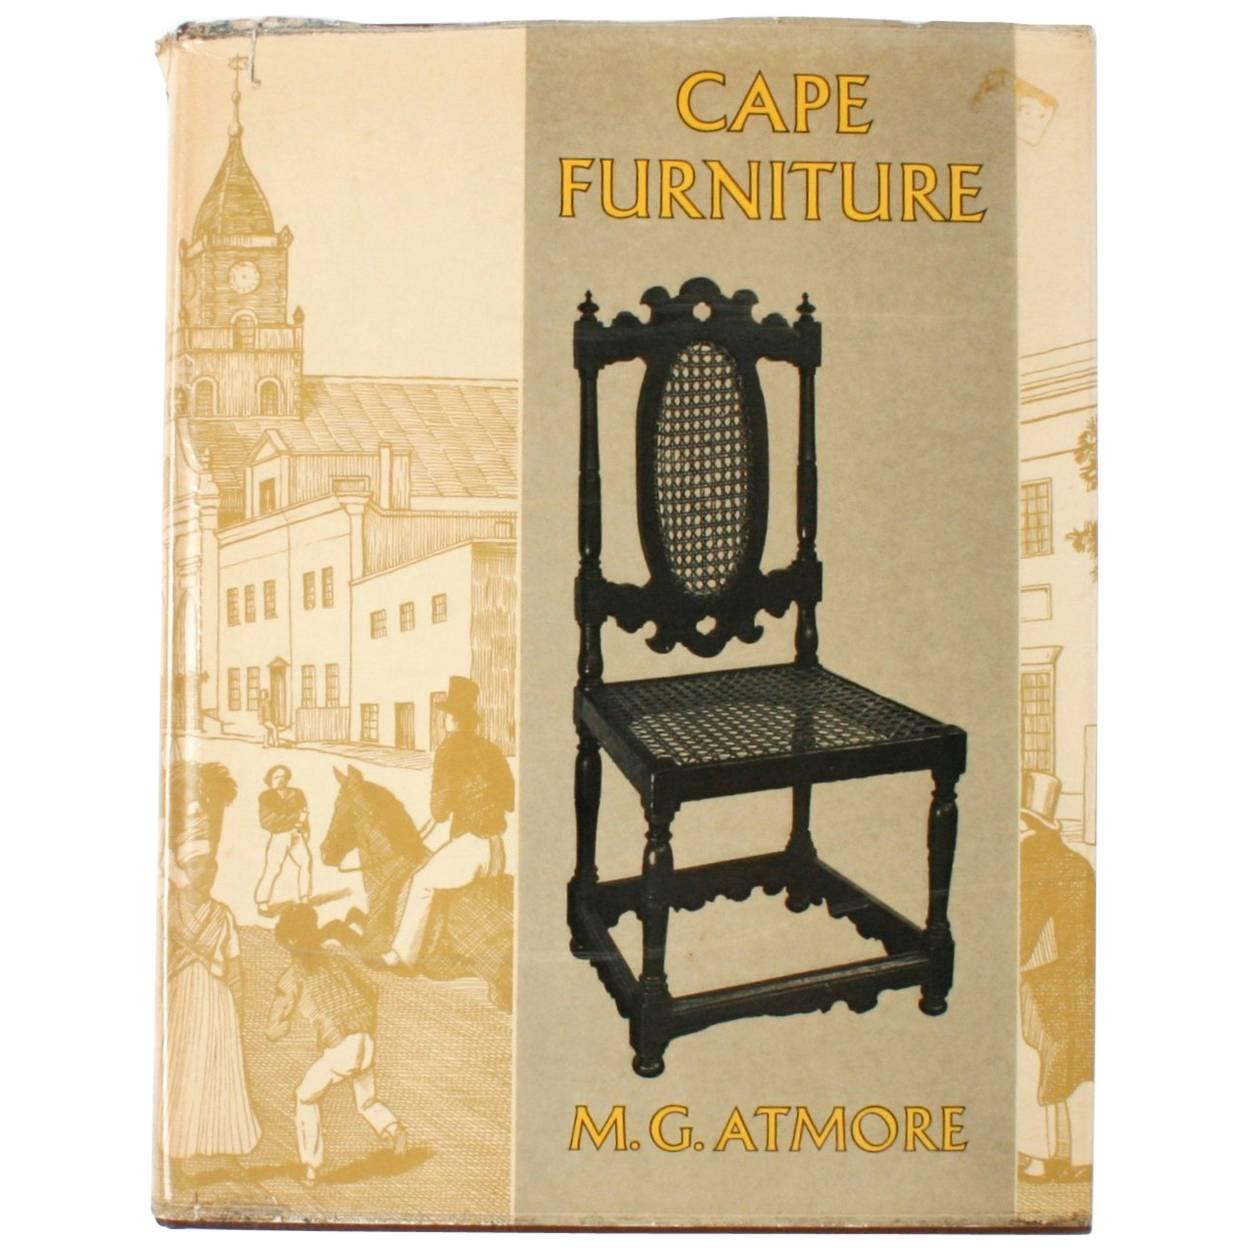 "Cape Furniture" Book by M. G. Atmore For Sale